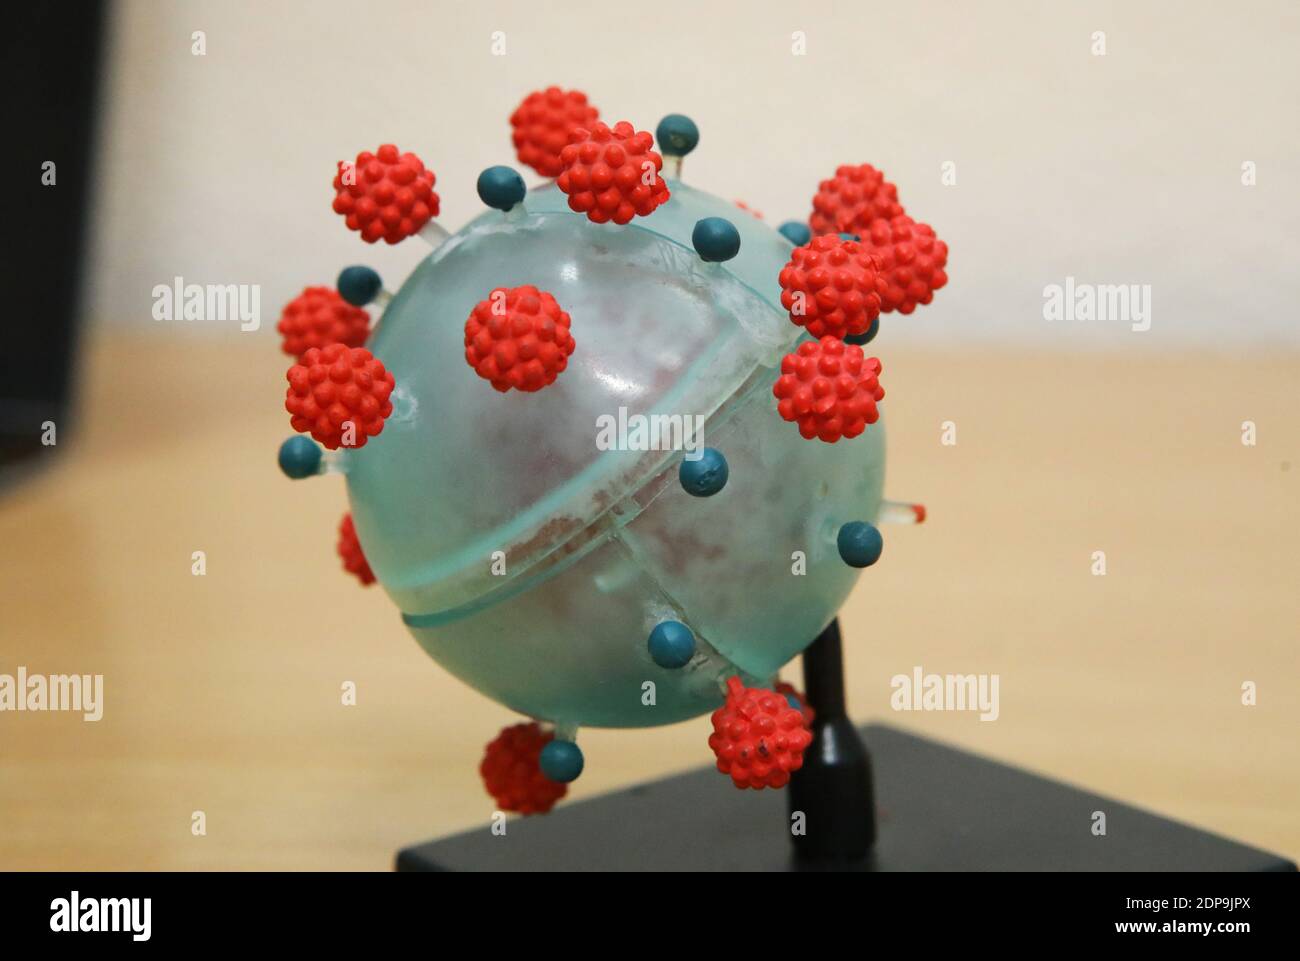 Non Exclusive: KHARKIV, UKRAINE - DECEMBER 18, 2020 - A plastic model of the coronavirus virion is pictured in an educational laboratory at the Kharki Stock Photo